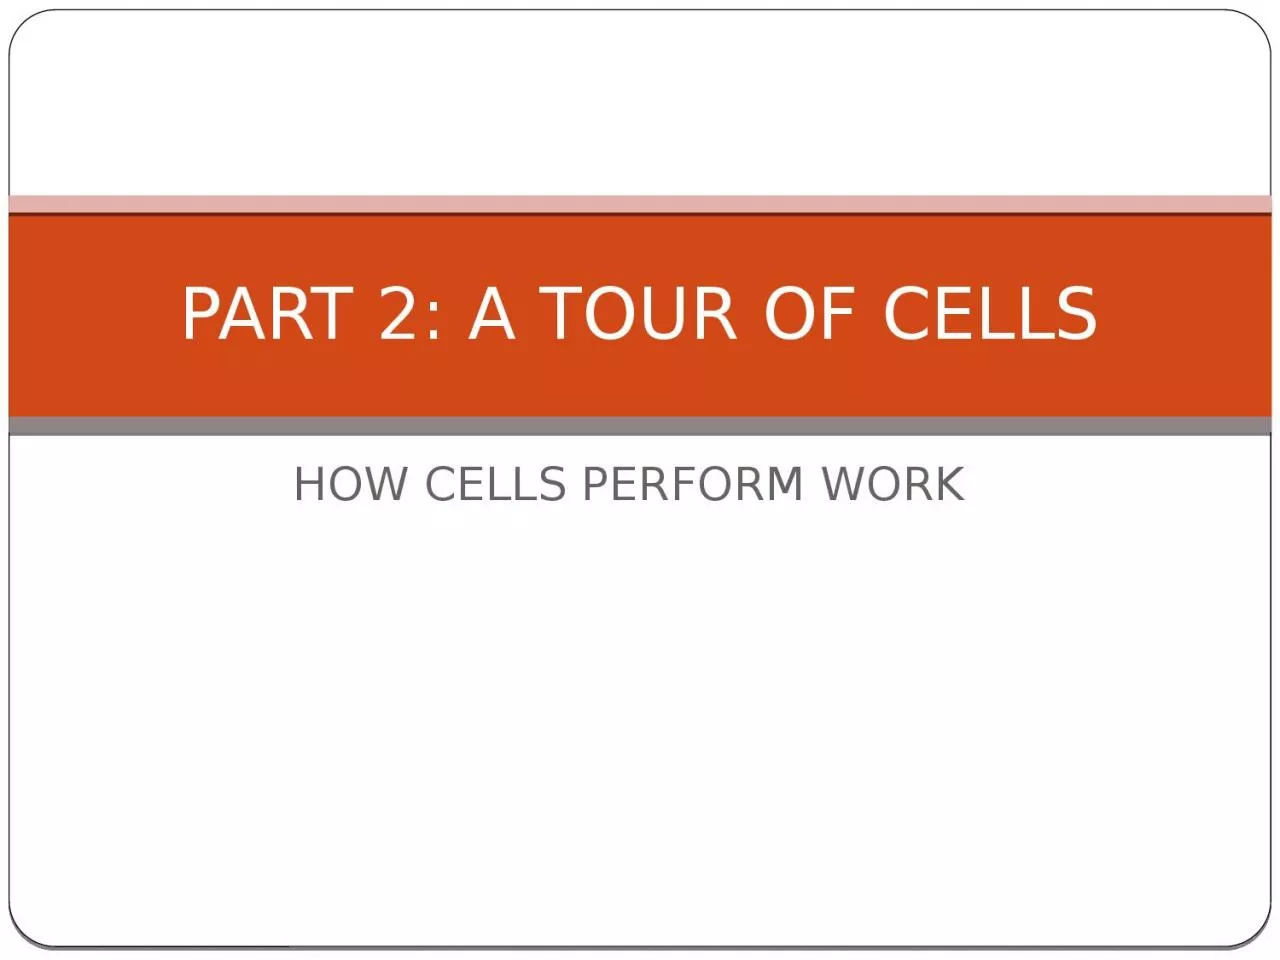 HOW CELLS PERFORM WORK PART 2: A TOUR OF CELLS